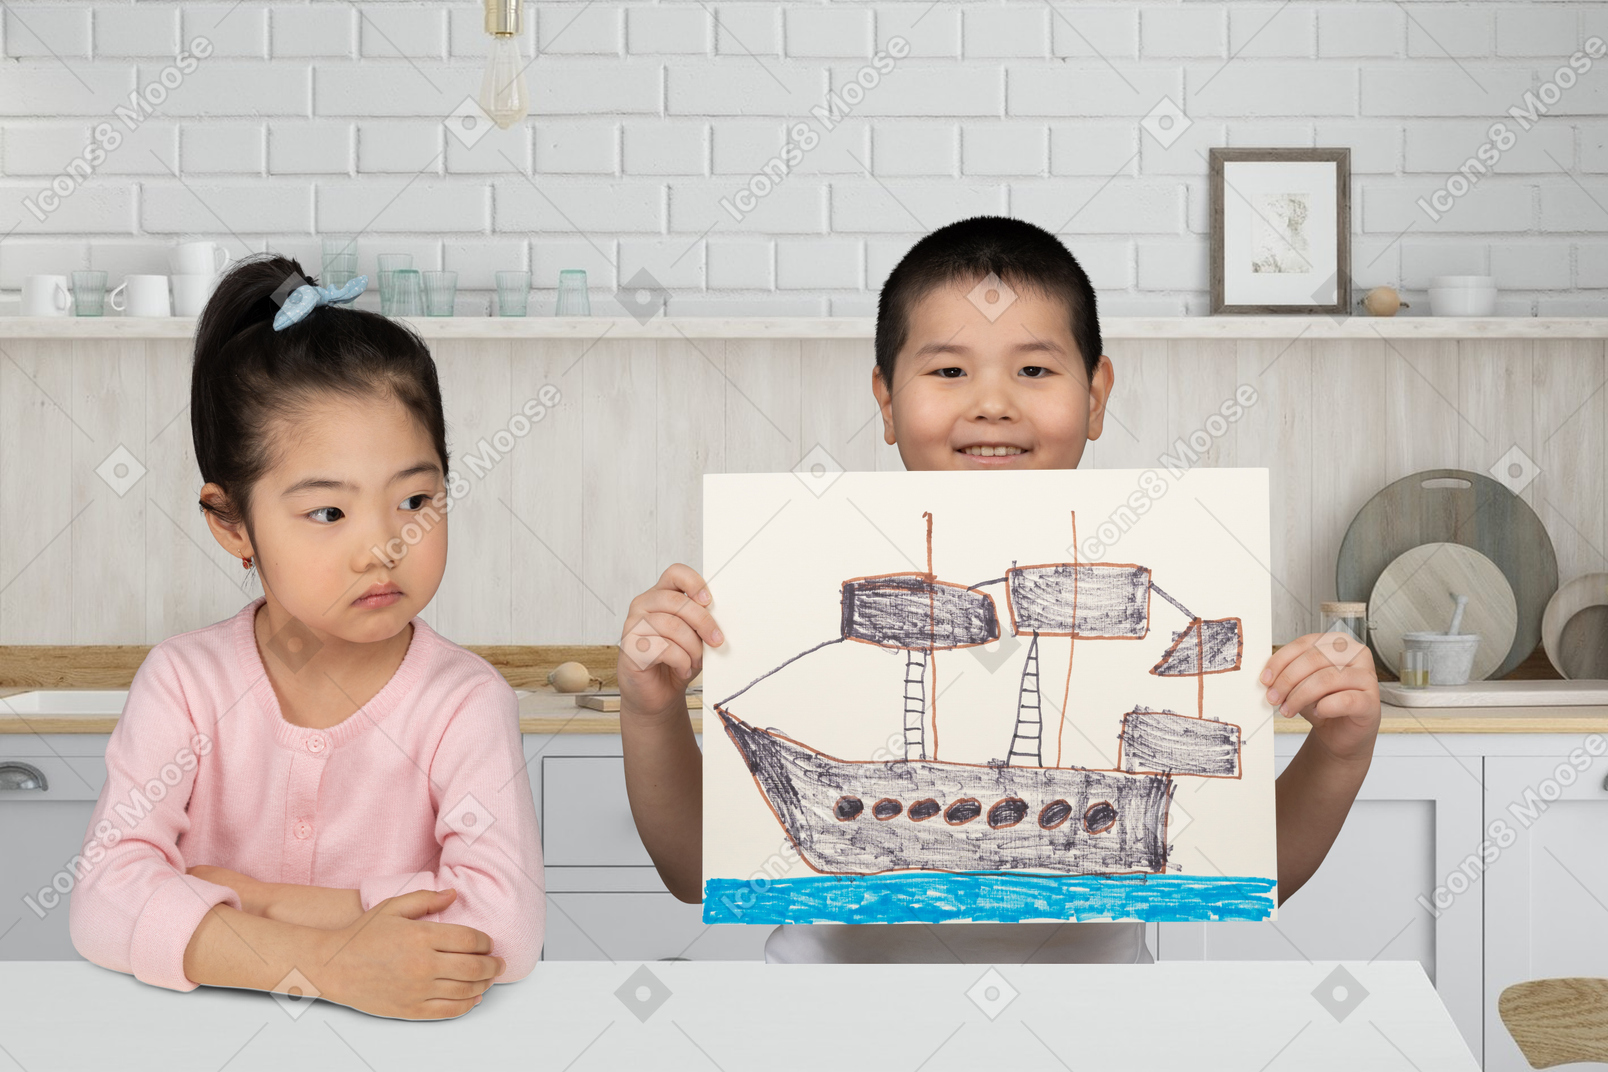 A little boy showing a drawing of a ship and sitting next to a little girl